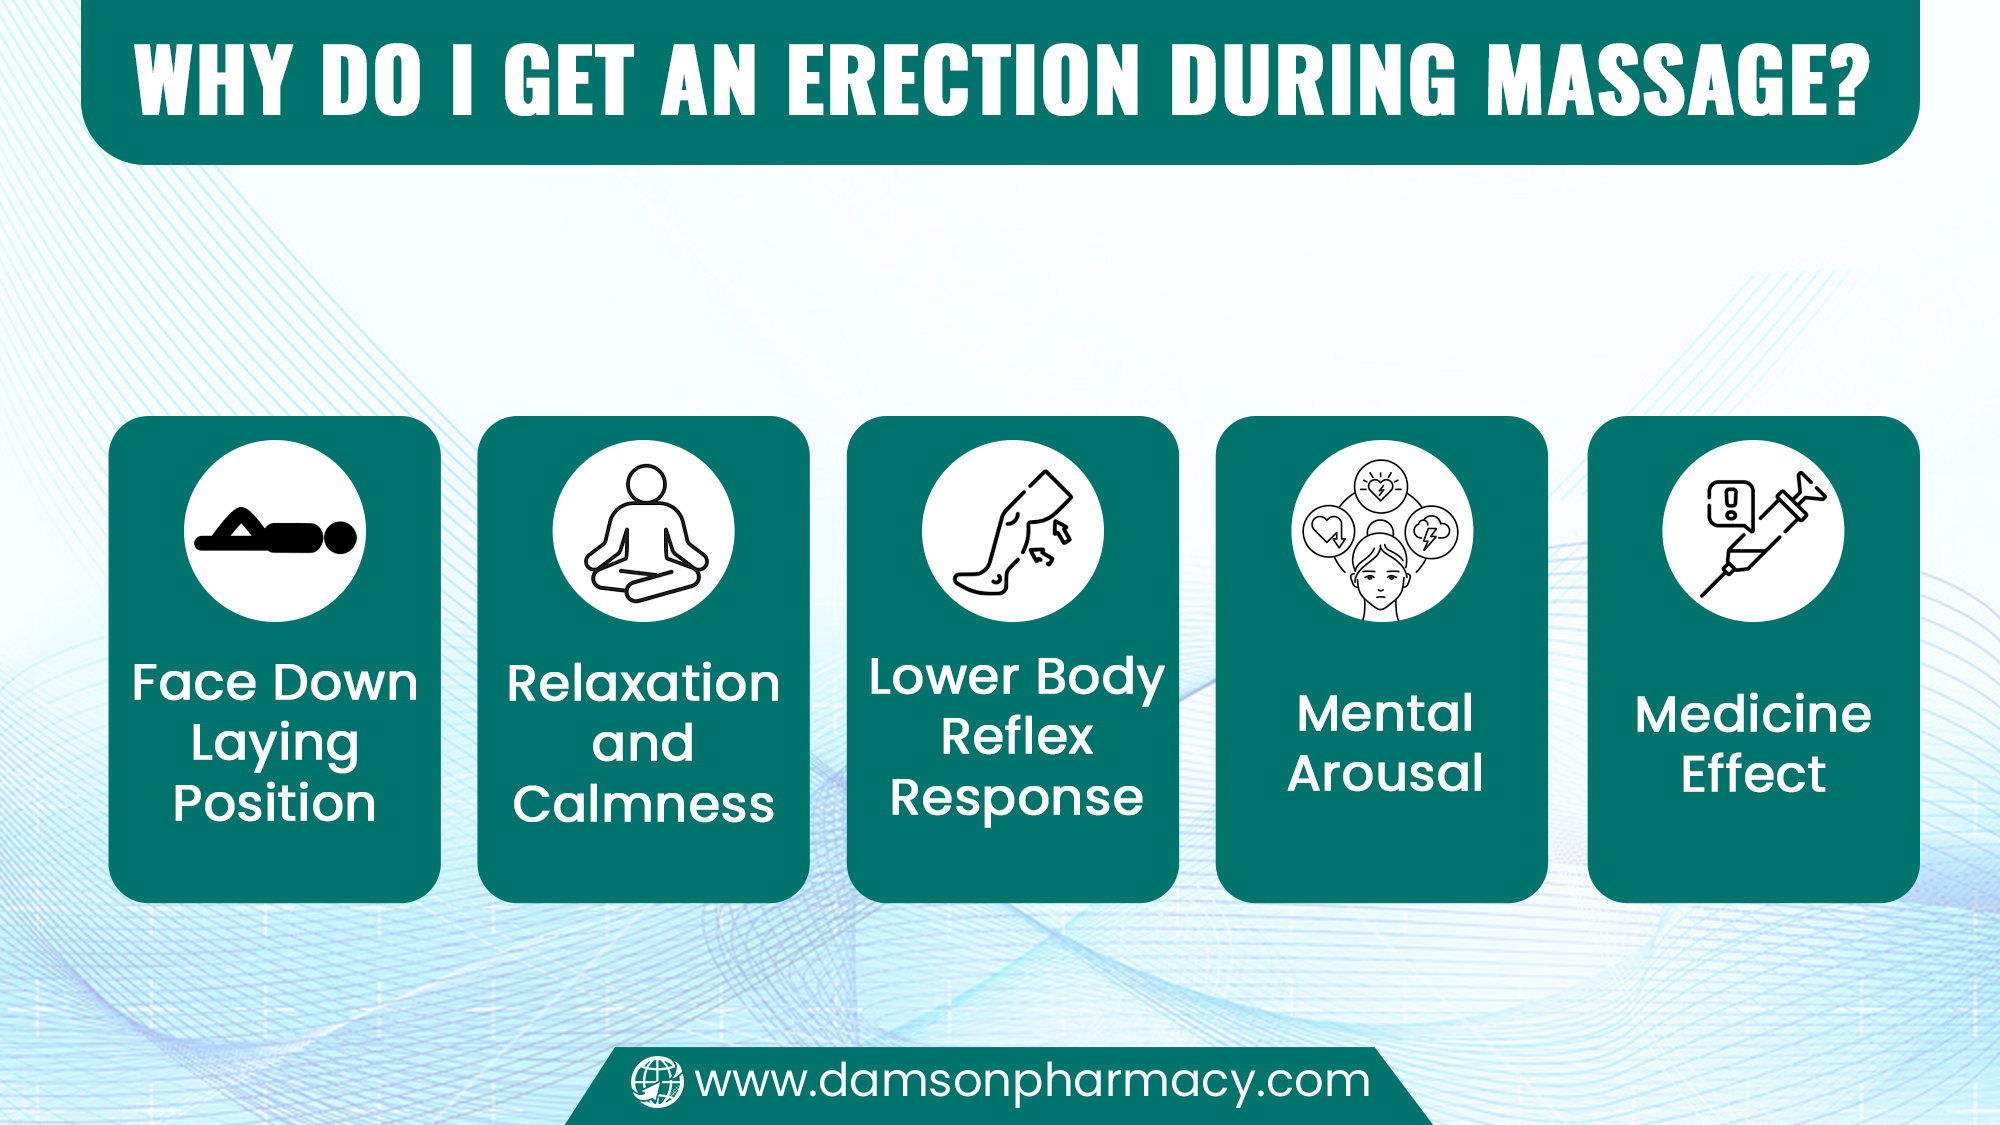 Why Do I Get An Erection During Massage